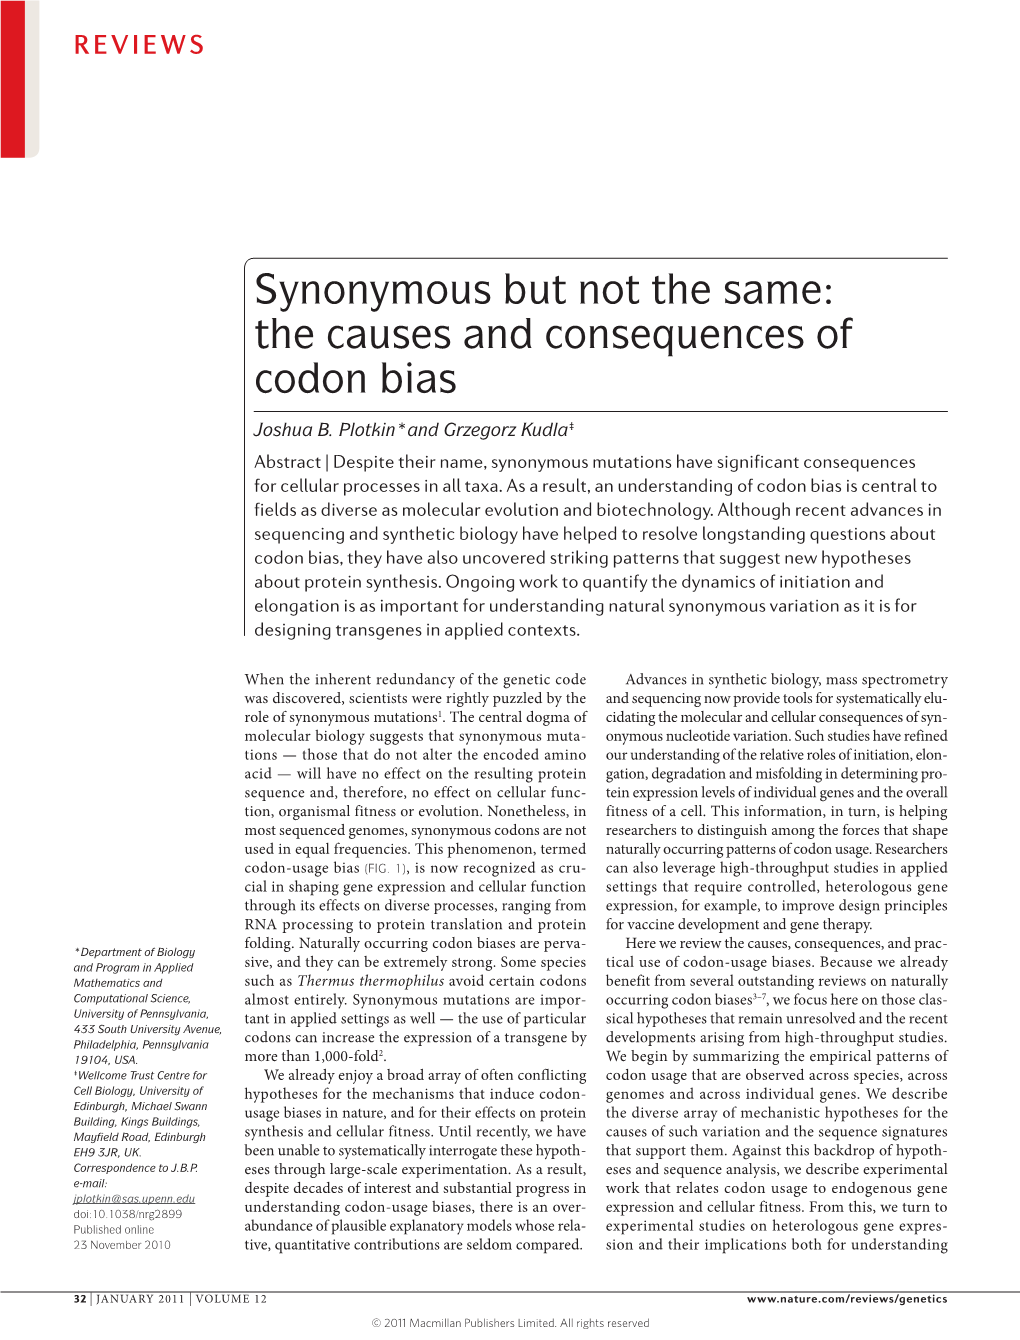 The Causes and Consequences of Codon Bias